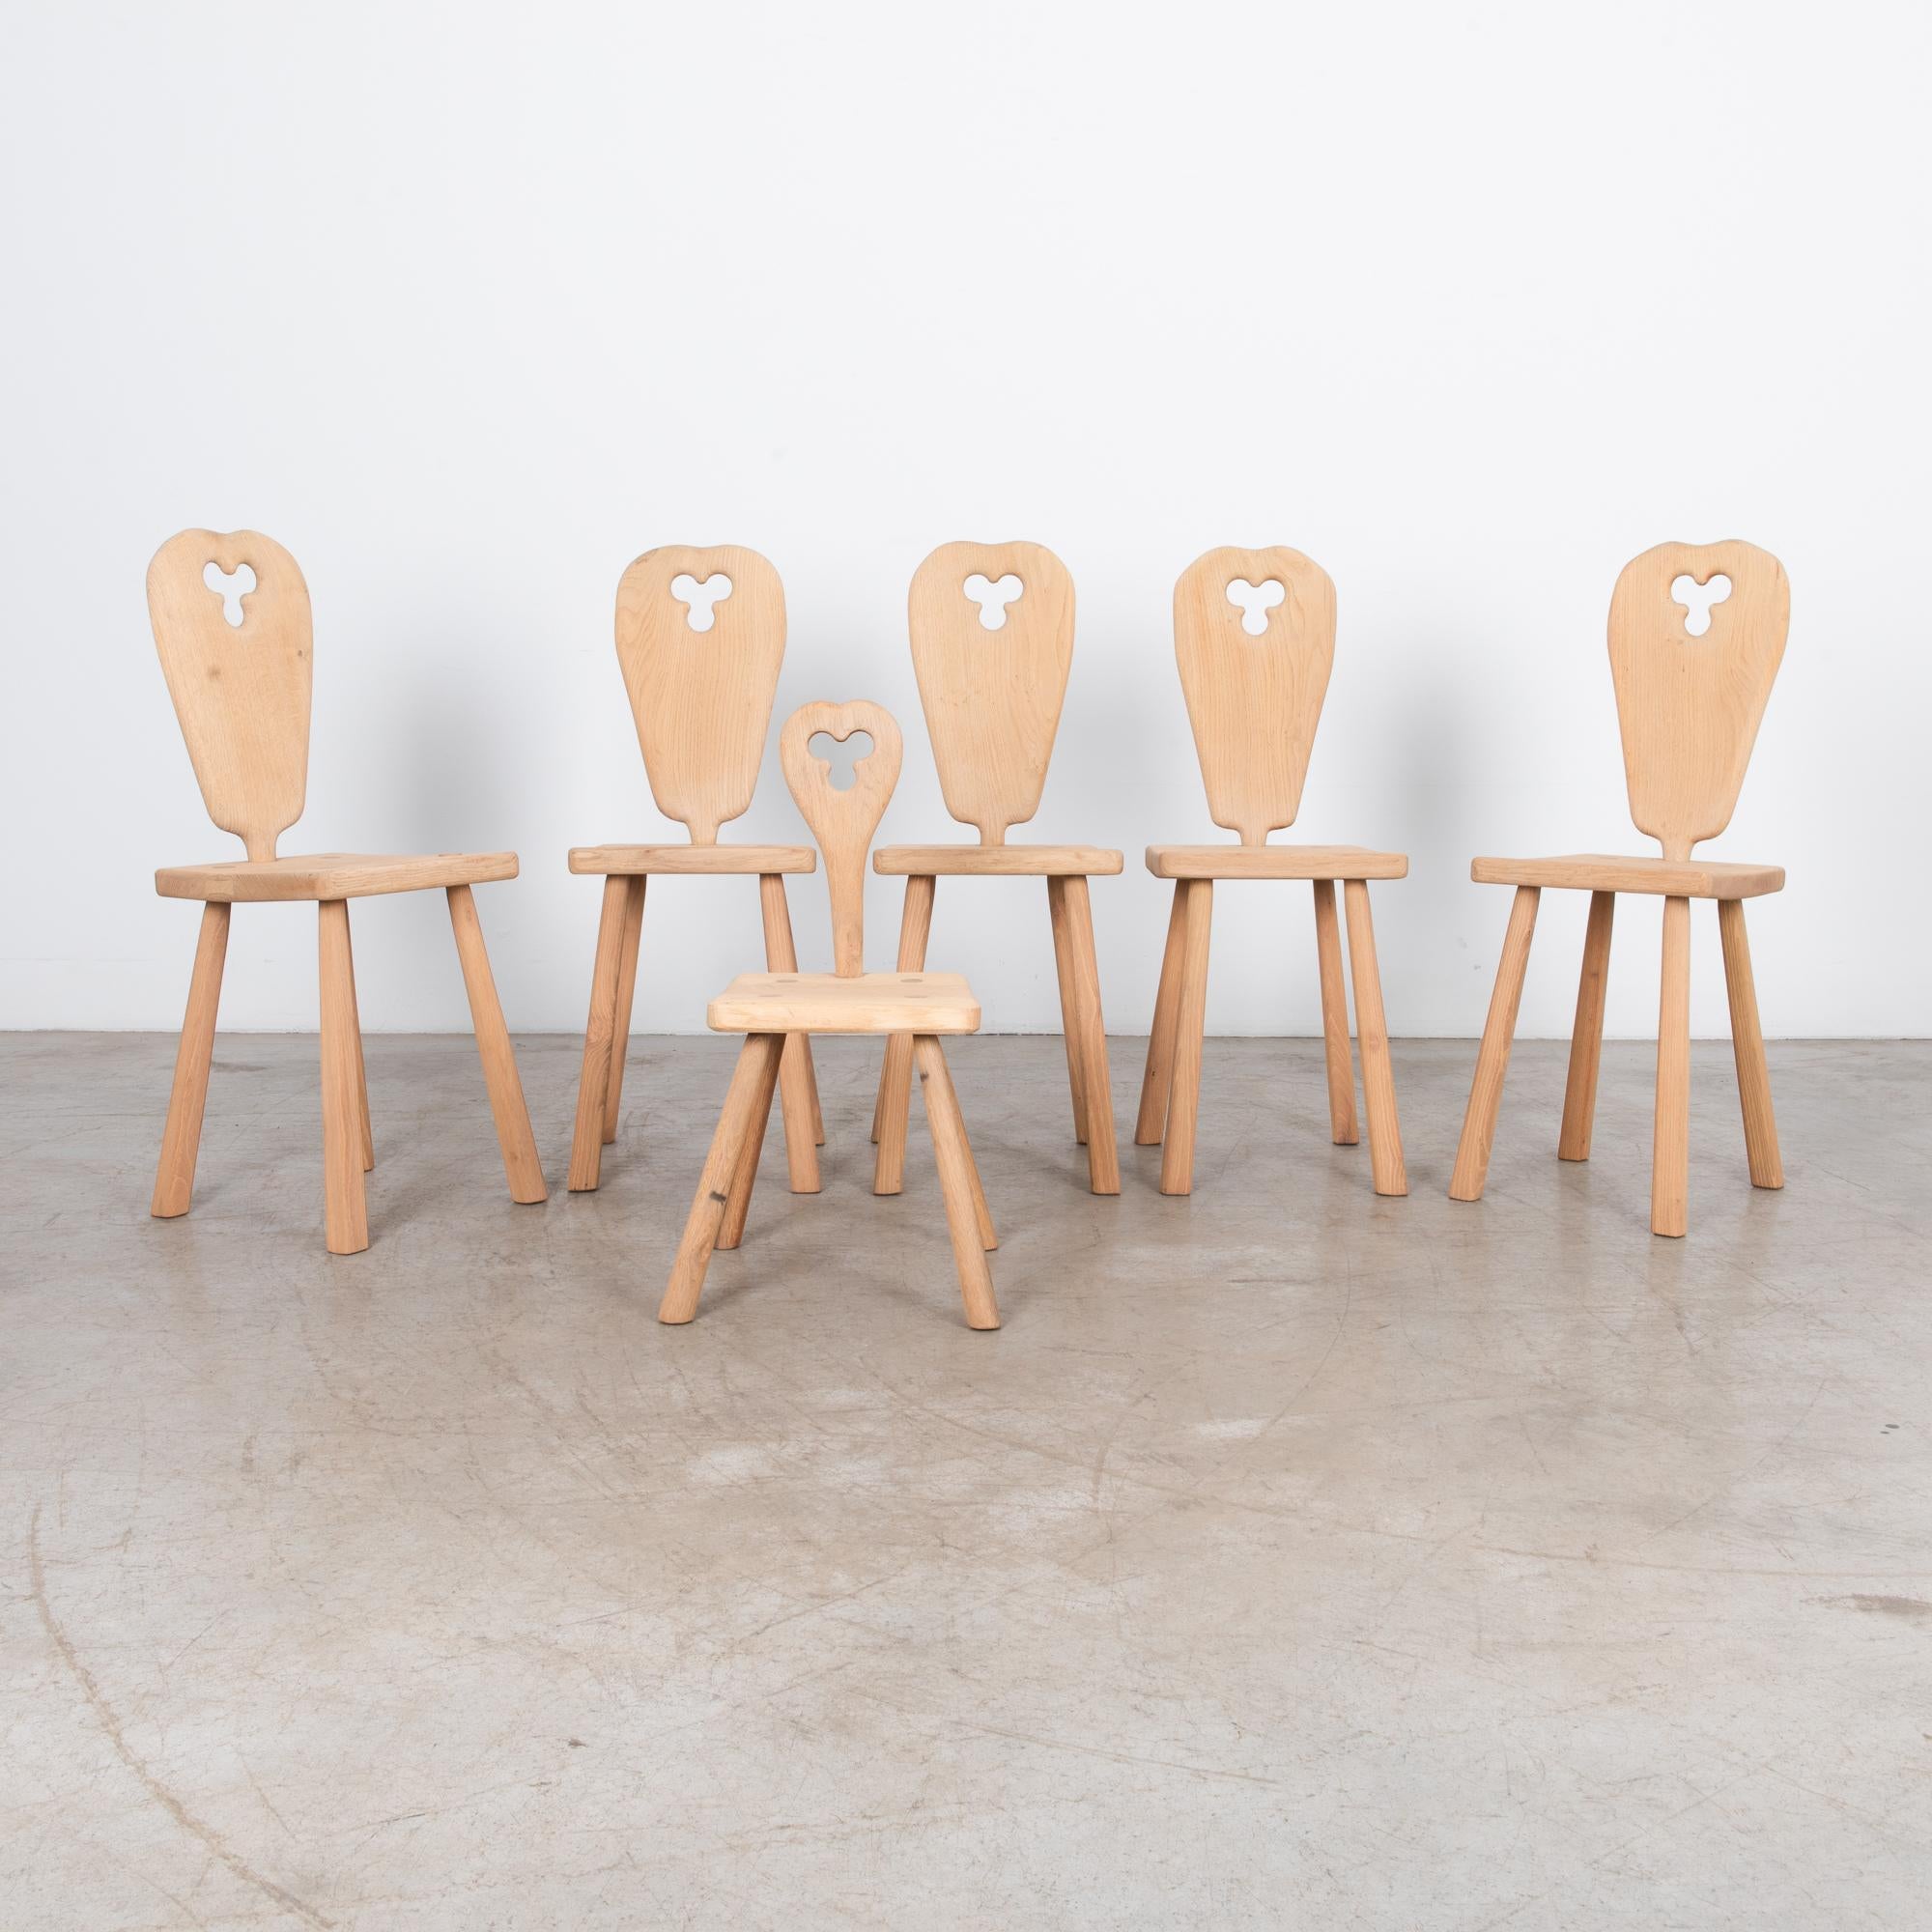 A minimal design in European oak, circa 1960. This unique set of dining chairs features one miniature version, great addition to complete the ensemble. The paired down design uses minimal parts, with one small ornament, a triangular shaped hole on